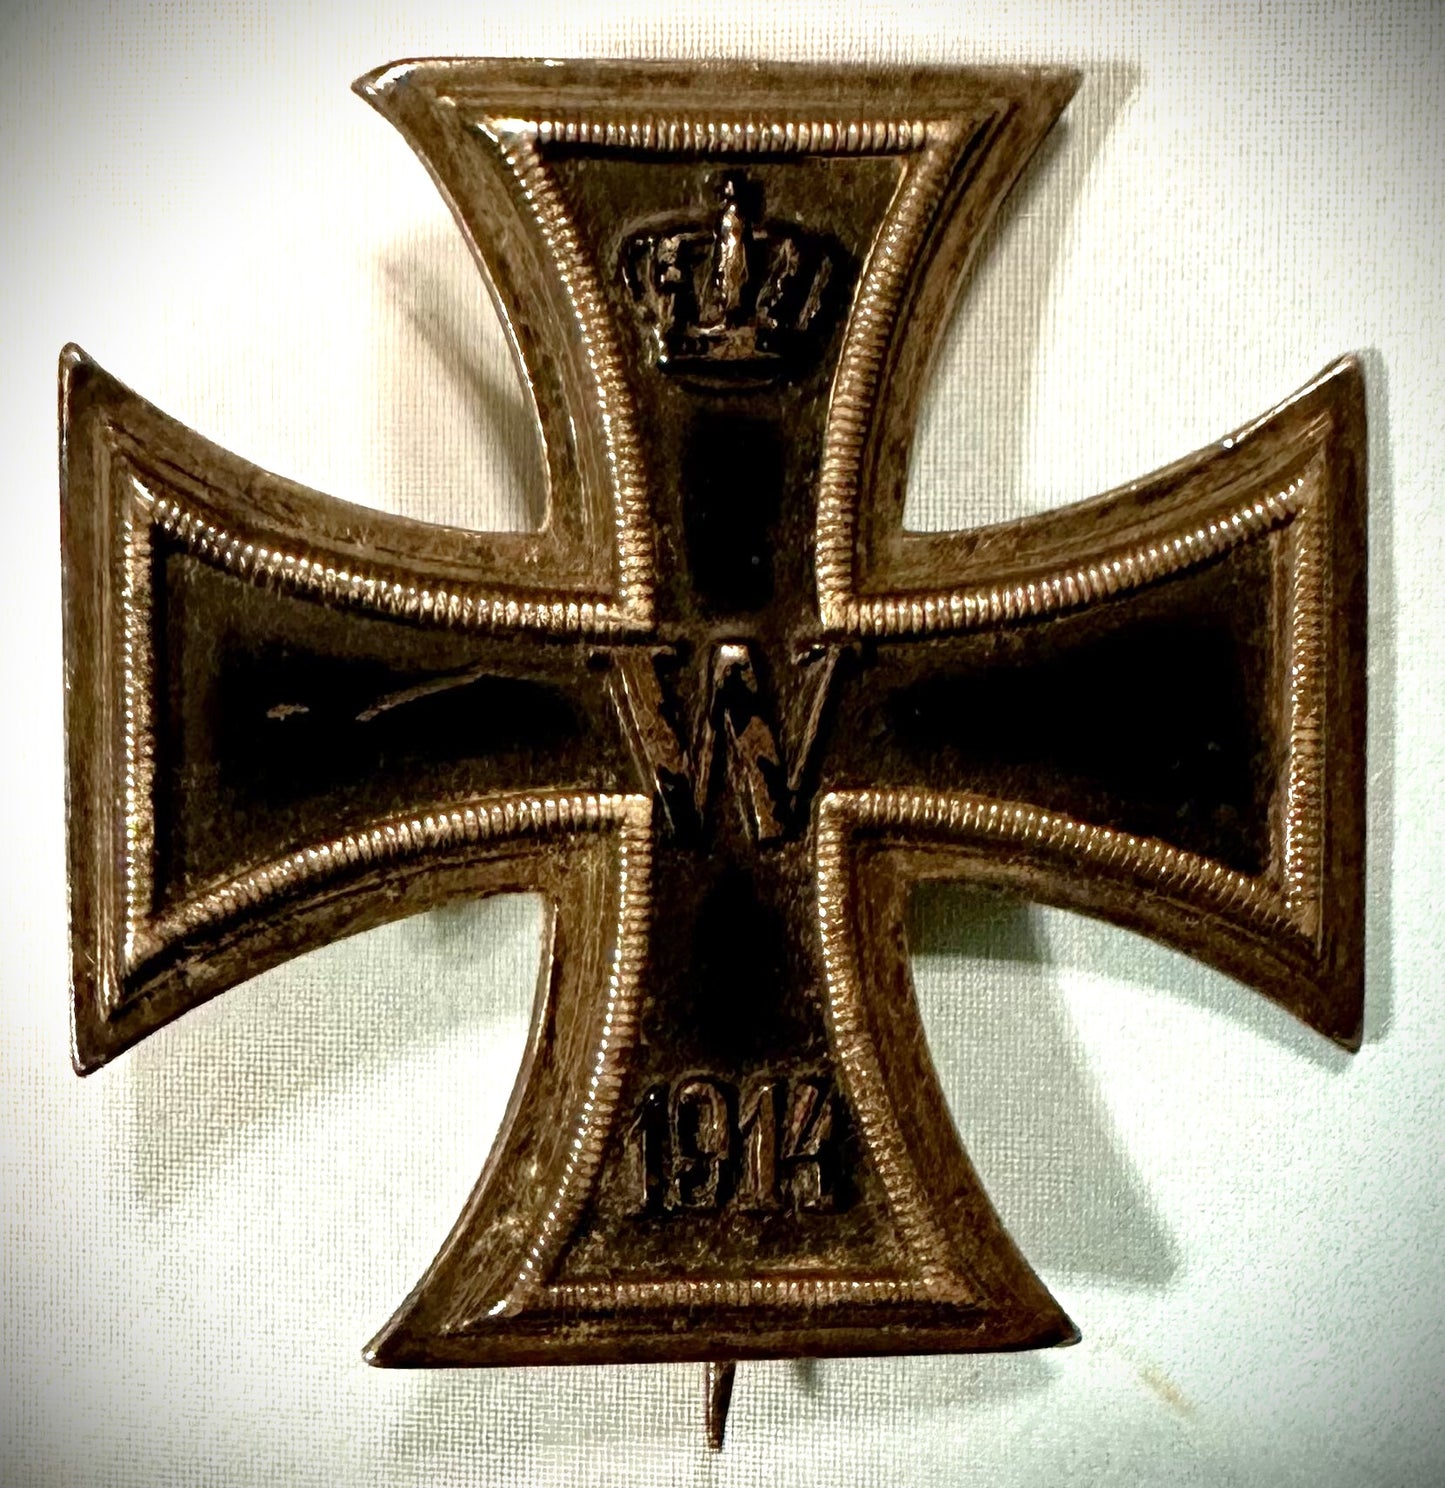 1914 Iron Cross 1st Class - Non-Vaulted Style - Derrittmeister Militaria Group